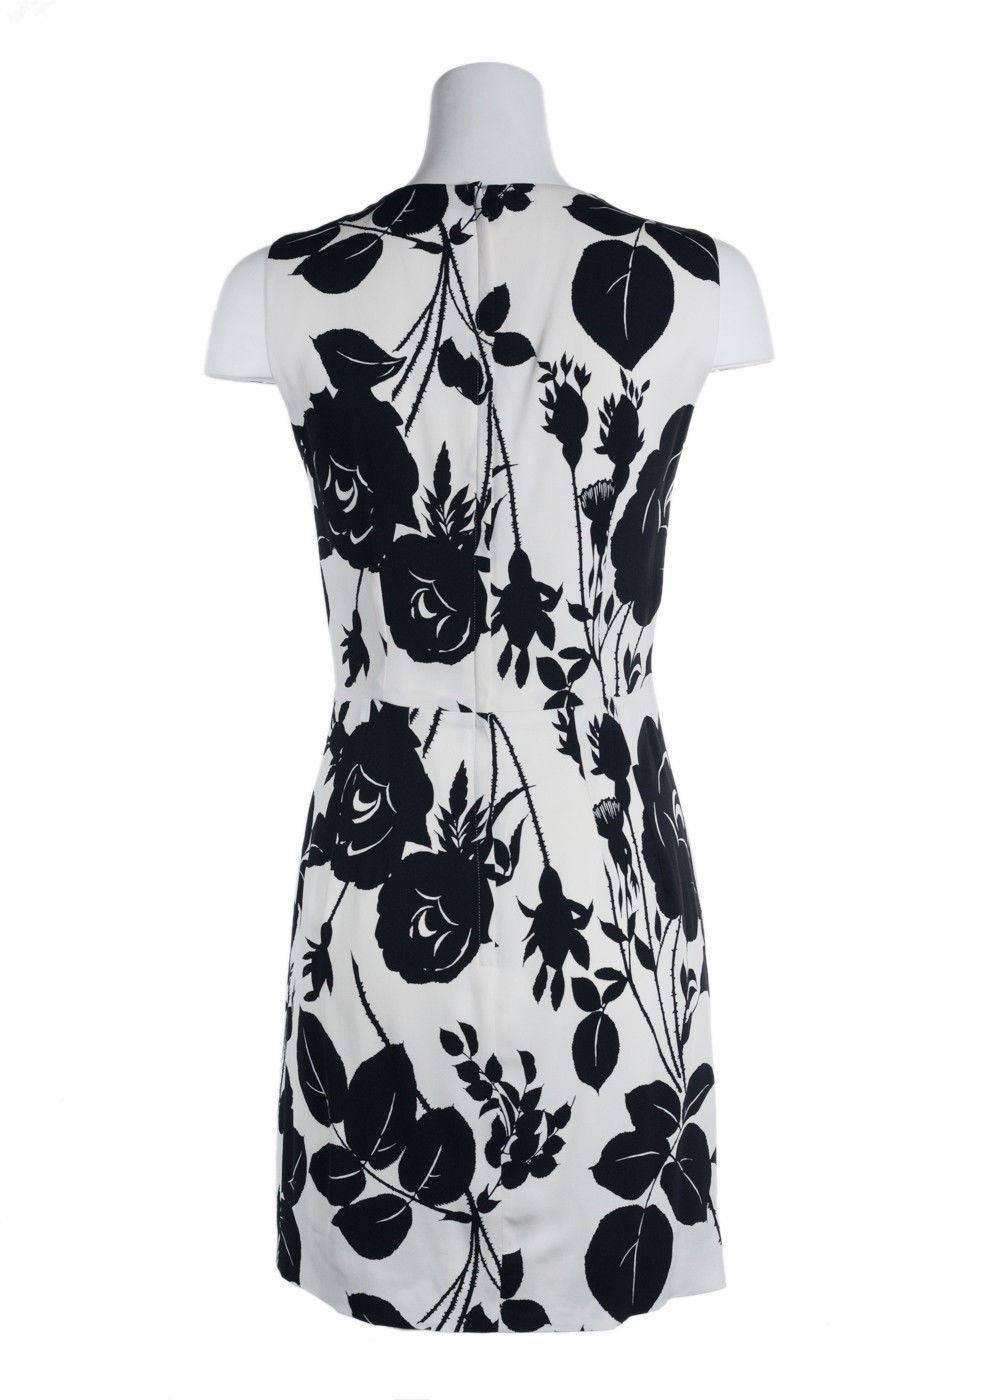 Brand New Dolce & Gabbana Women's Dress
Original Tags & Hanger Included
Retails in Stores & Online for $2895
Size IT38 / US2 Fits True to Size

Dolce & Gabbana's viscose blend floral sleeveless dress. This sleeveless designer dress features black